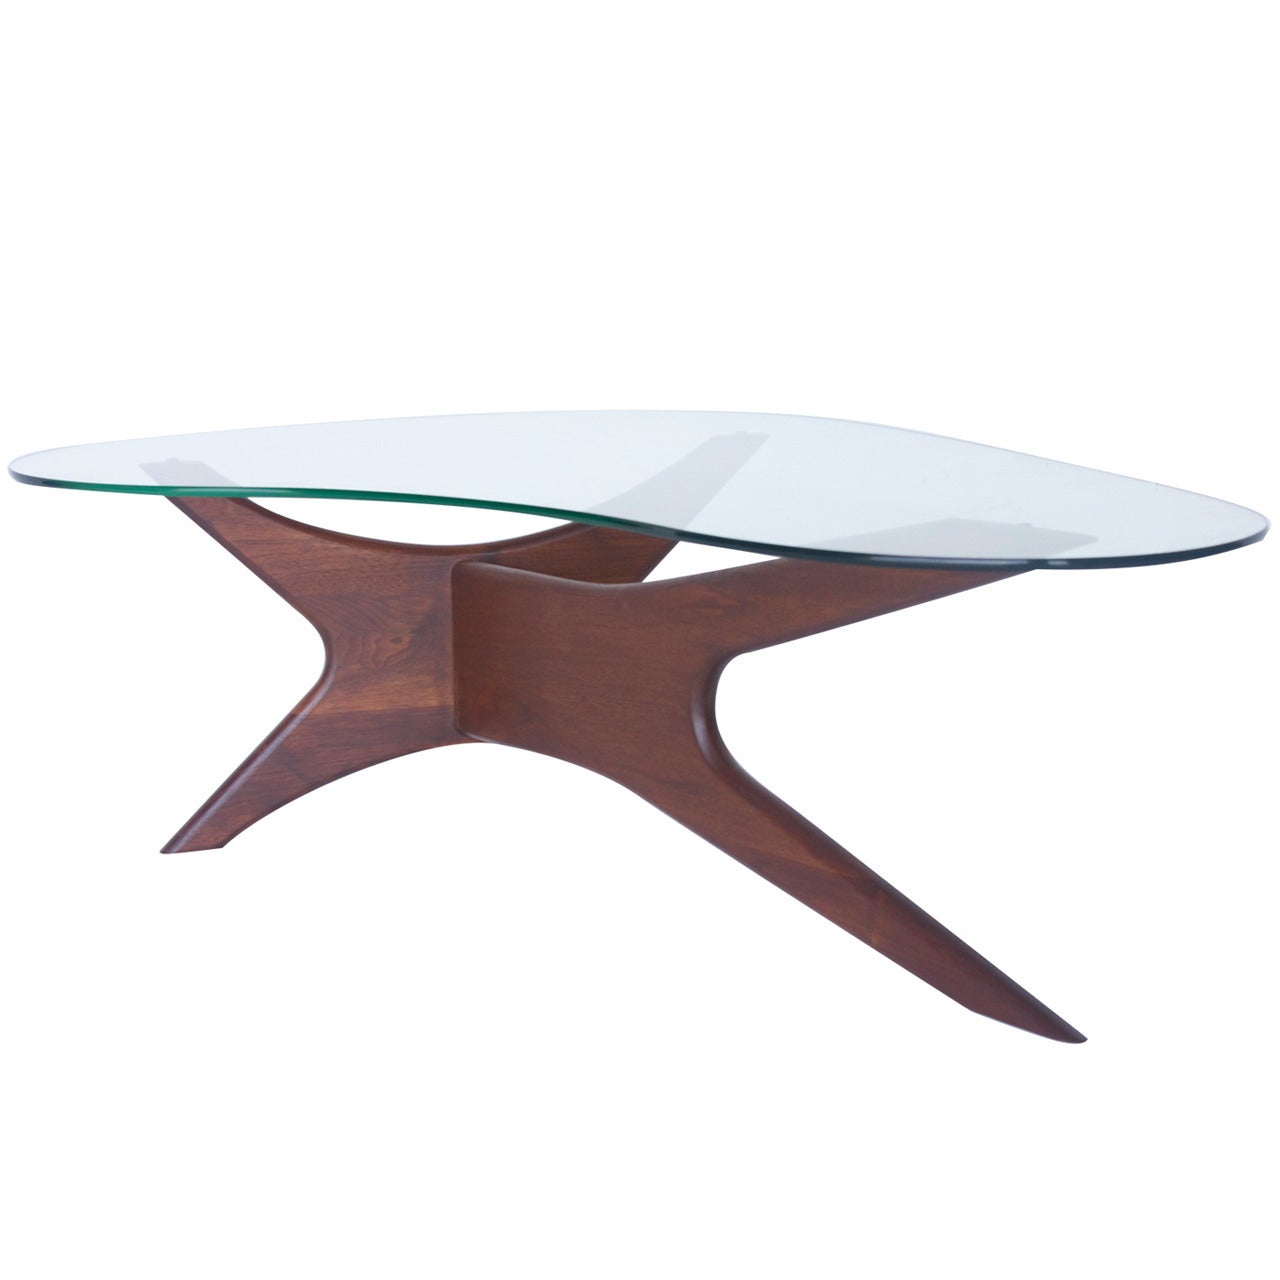 Adrian Pearsall Kidney Shaped Coffee Table for Craft Associates